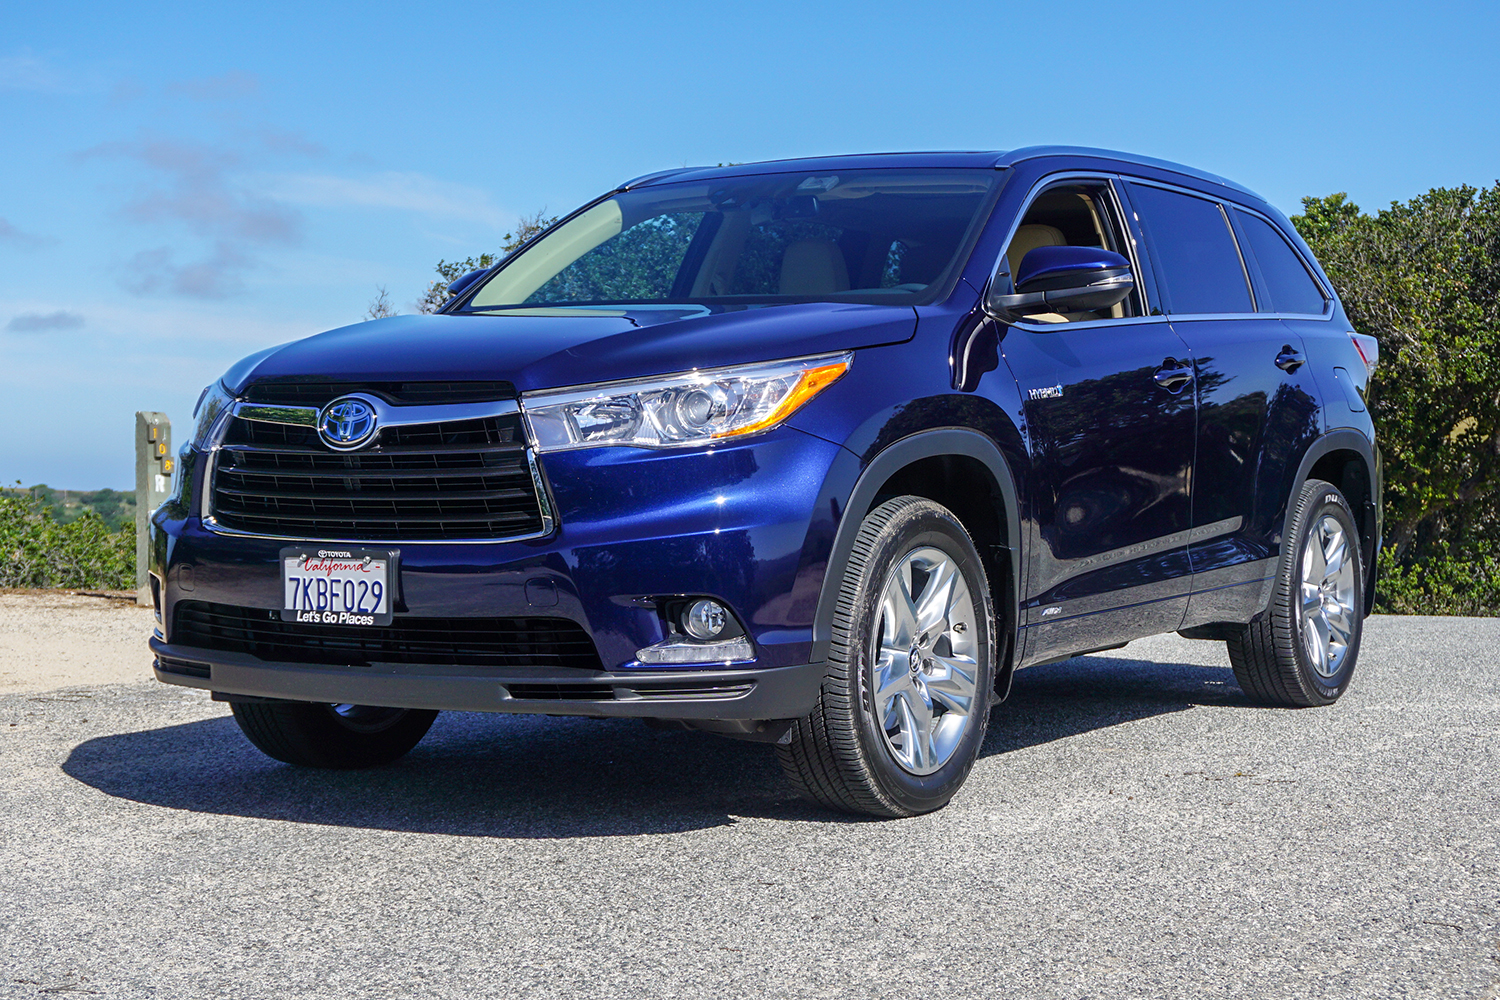 Take an ultimate in-depth look in 4K at the Toyota Highlander XLE on YouTube.